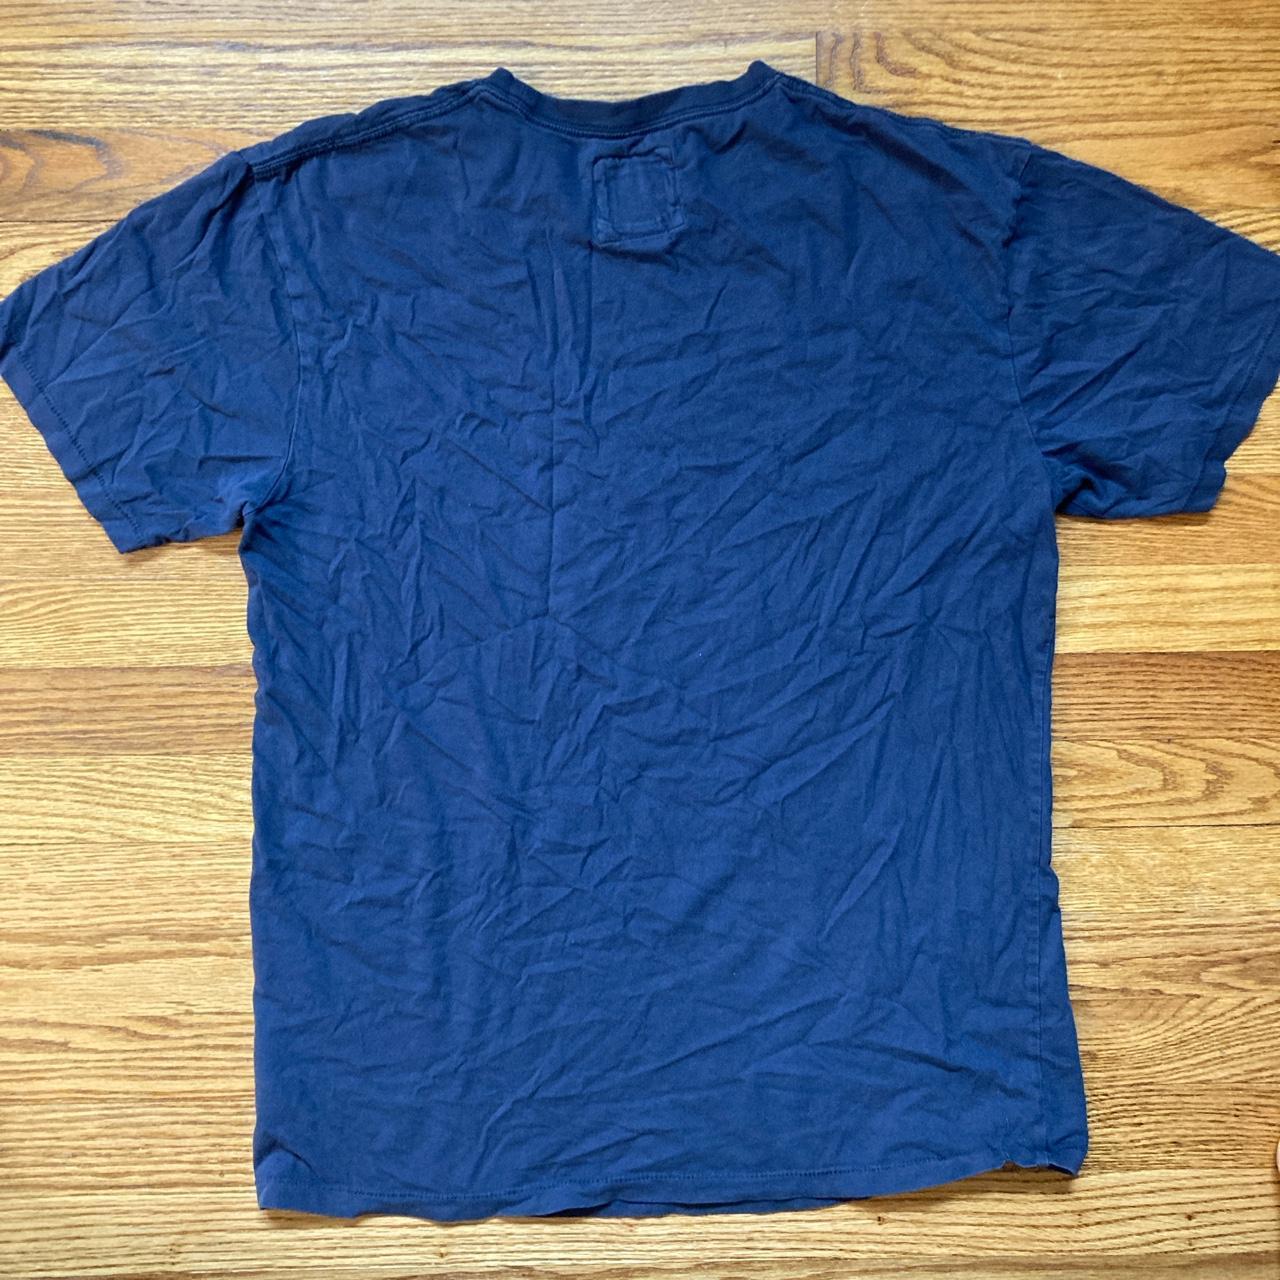 Barney Cools Men's Navy and Blue T-shirt (4)